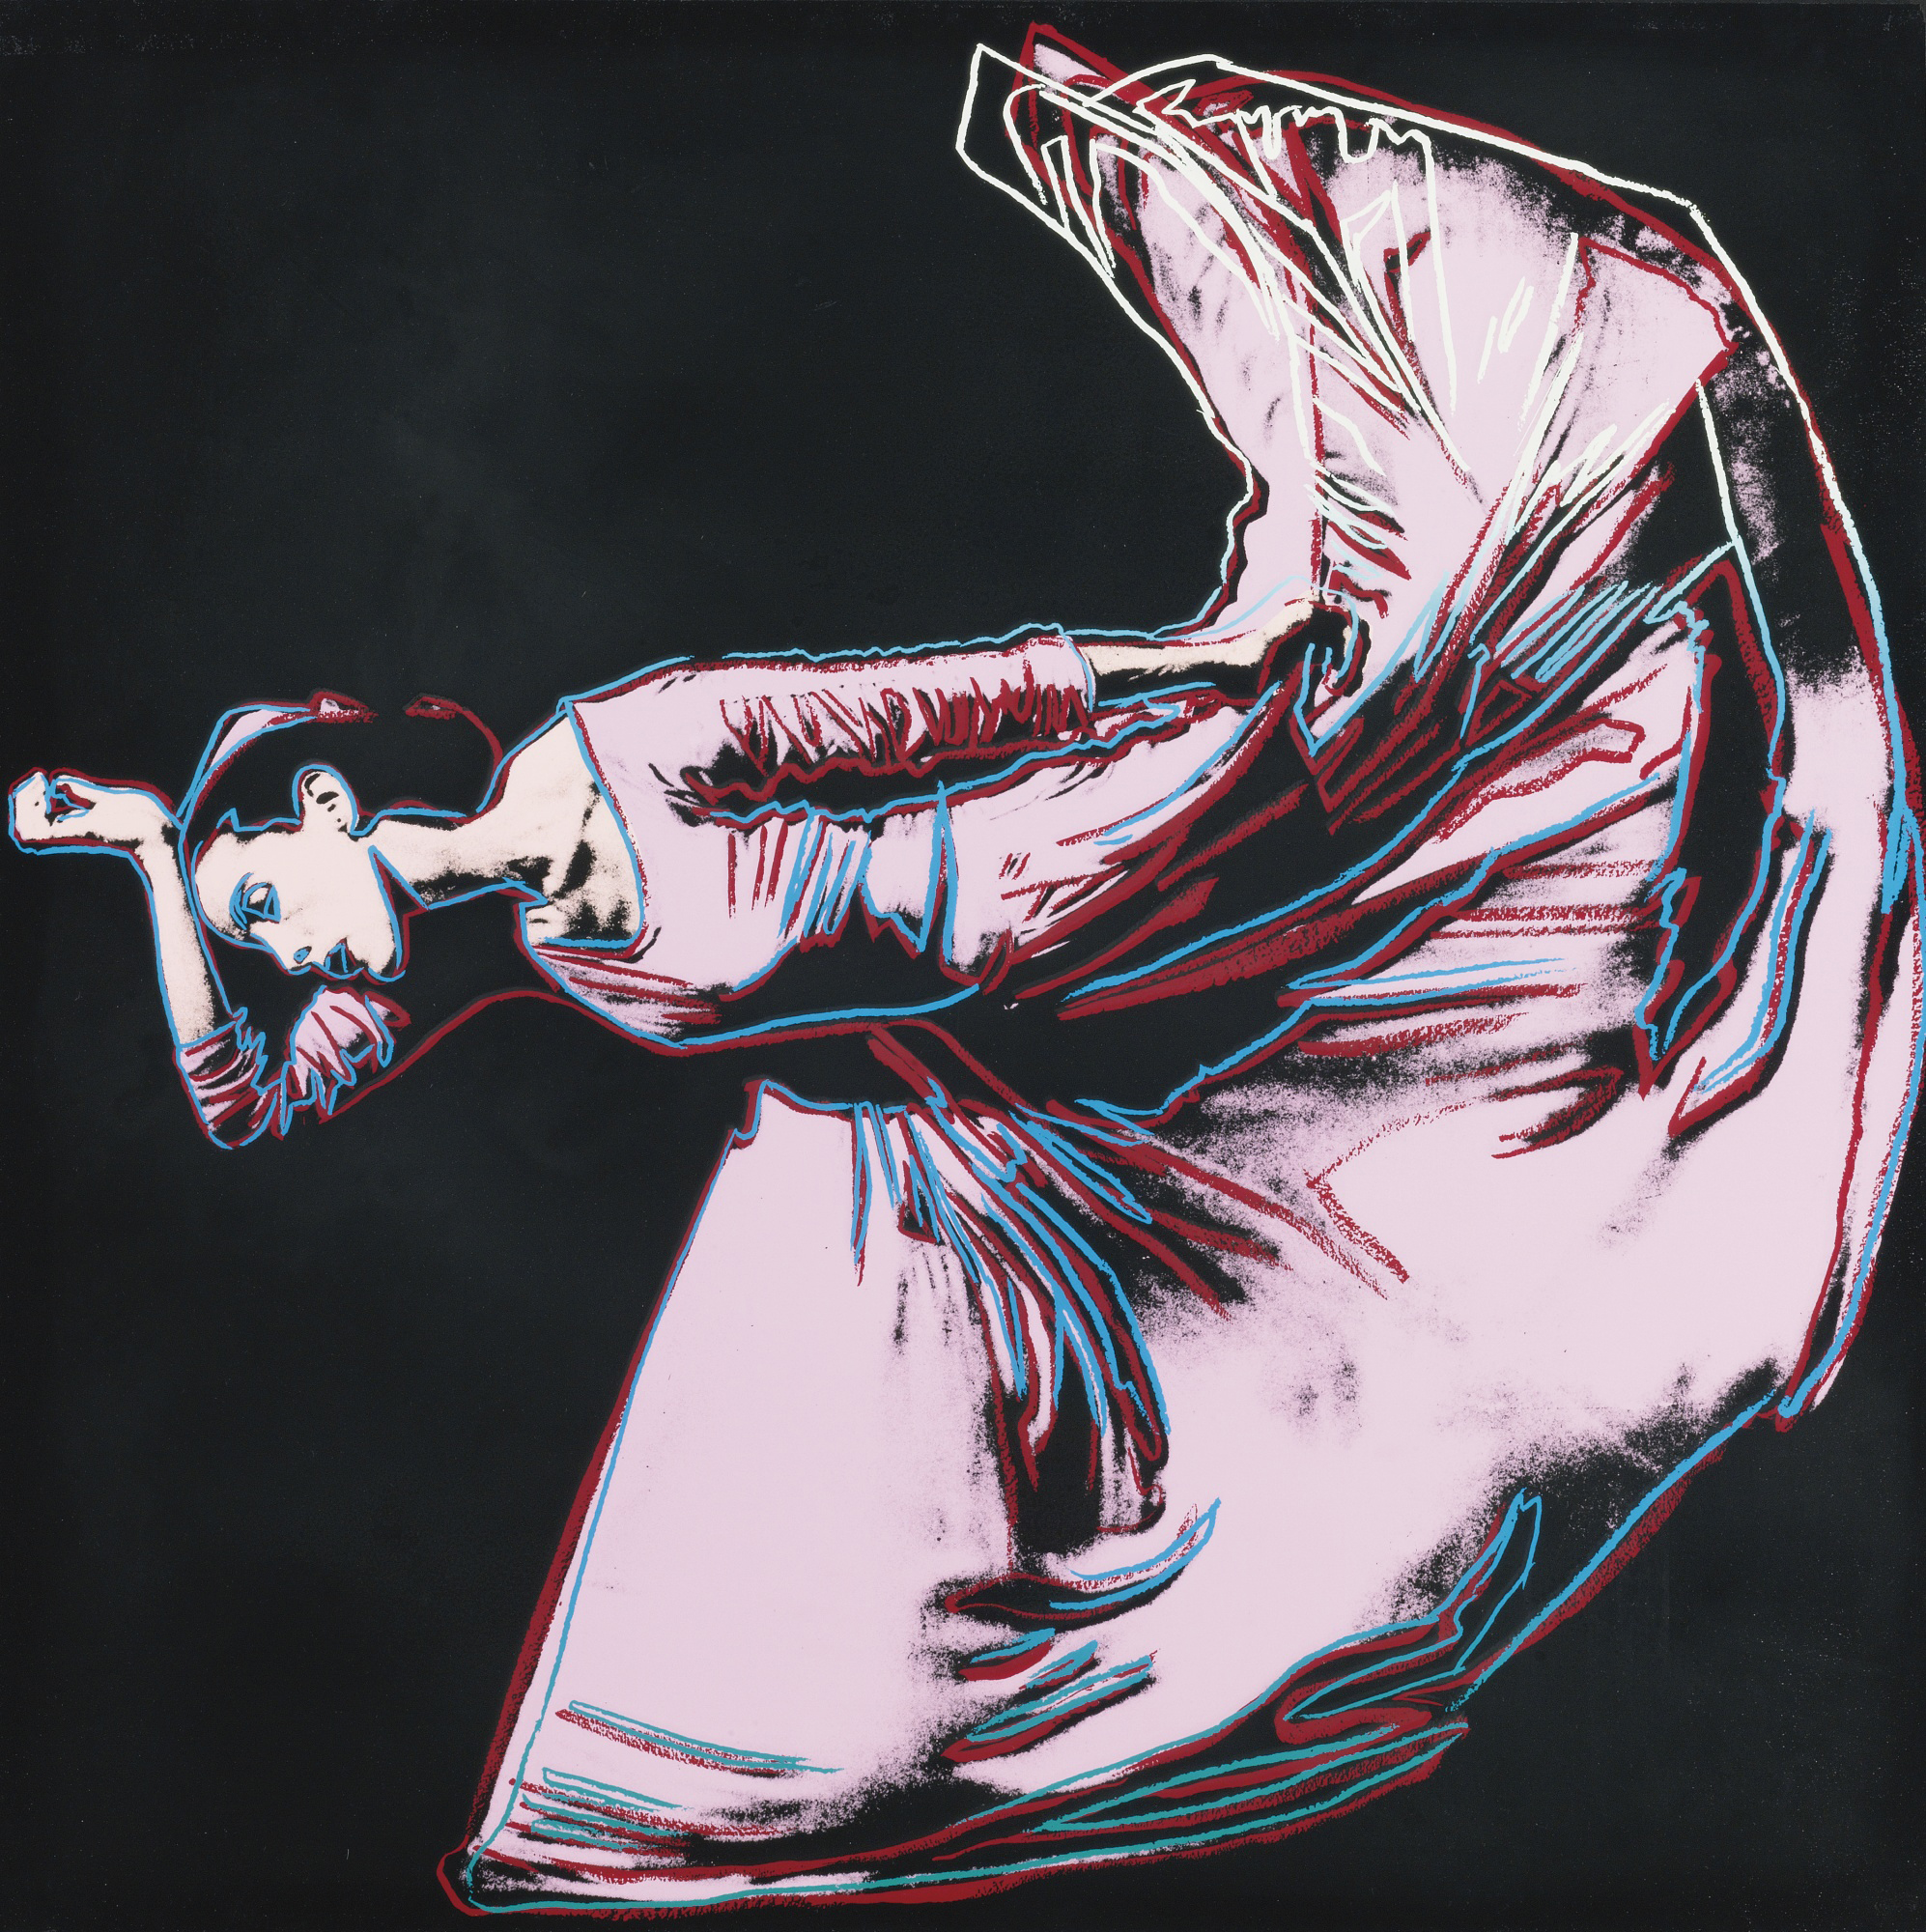 Andy Warhol, Letter to the World (The Kick) (from Martha Graham)